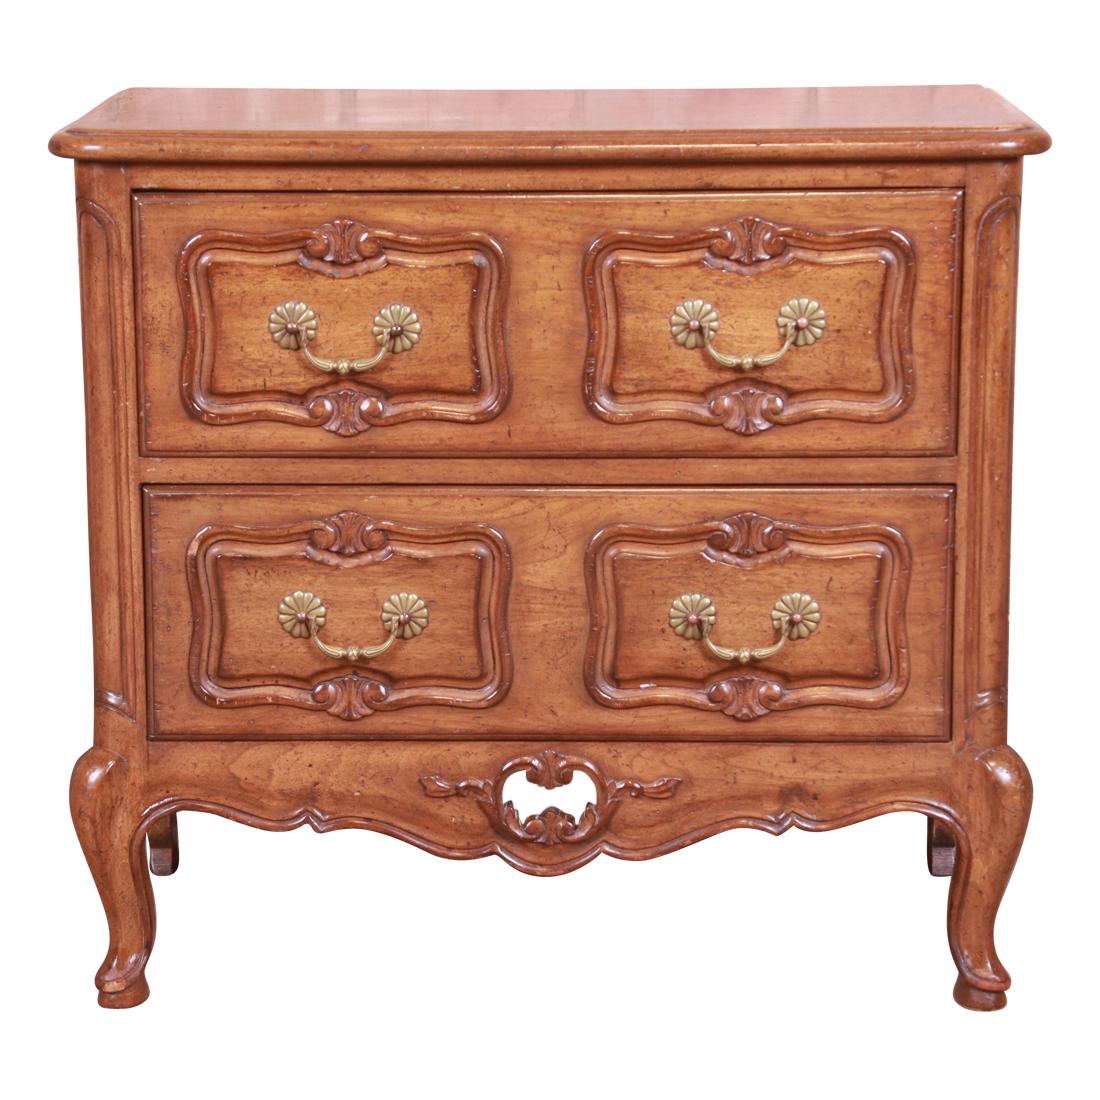 Auffray & Co. French Provincial Louis XV Carved Walnut Chest of Drawers